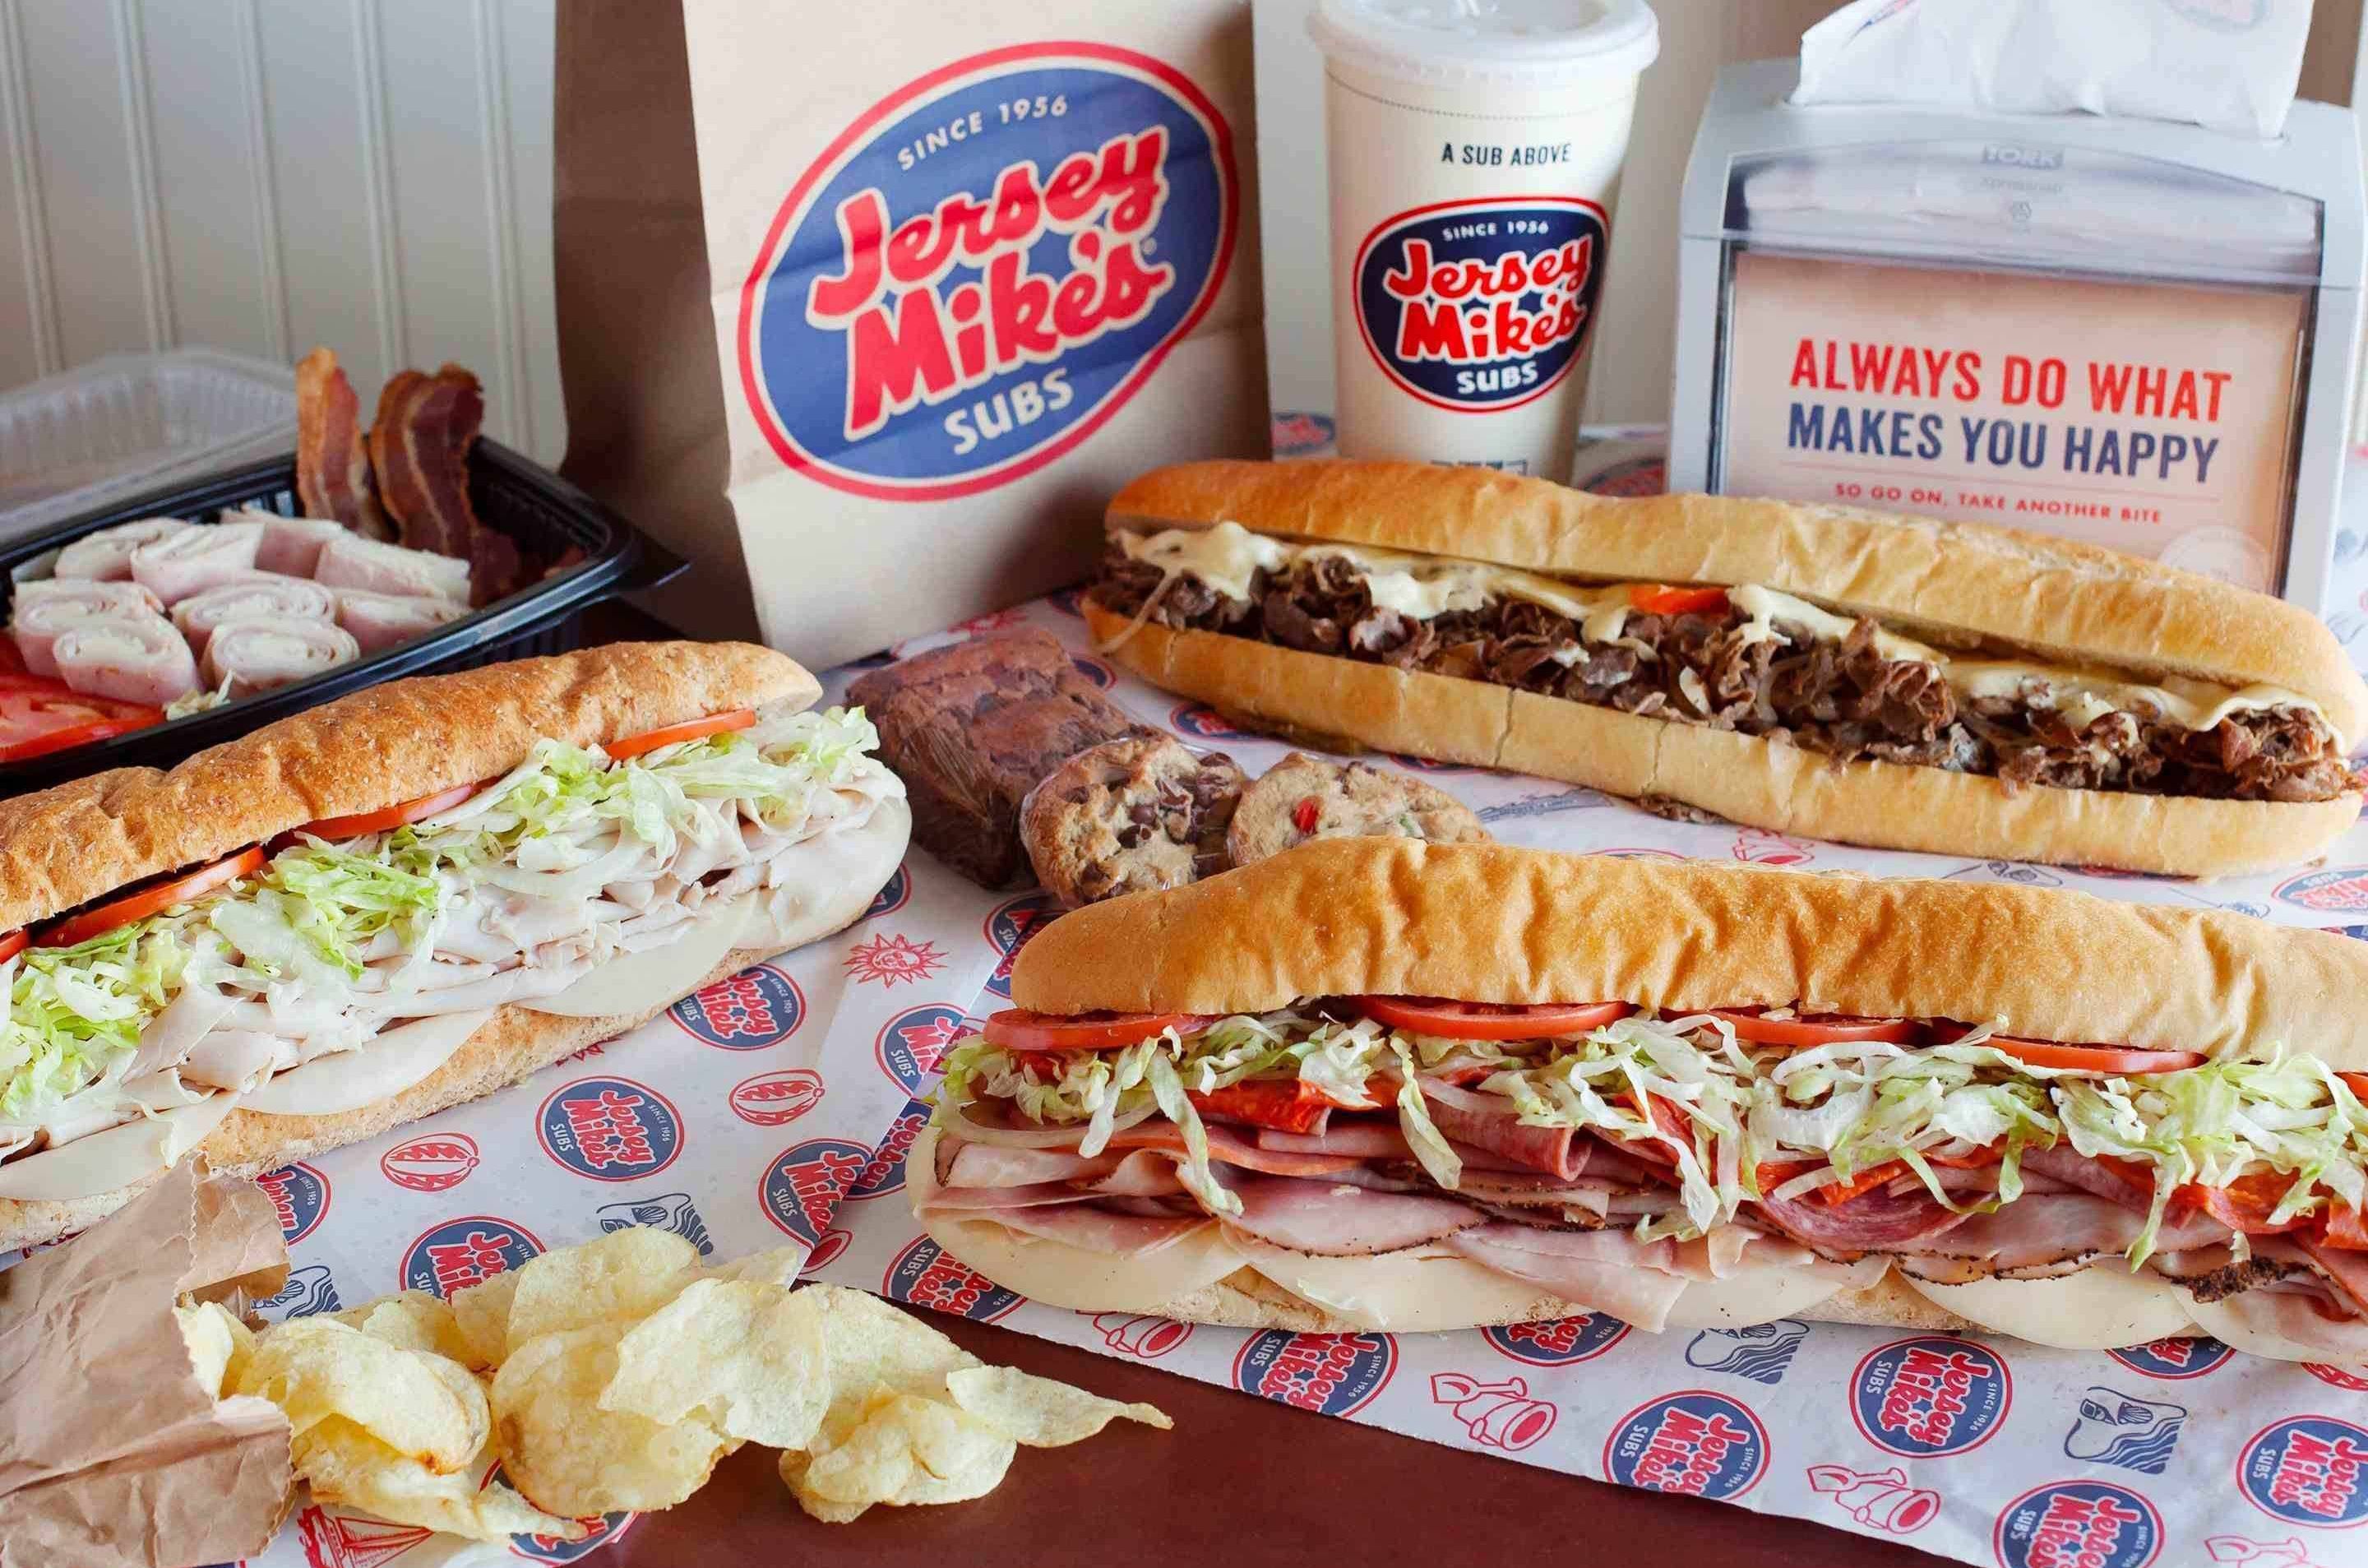 Buy 2 Subs and Get 1 Free Through to February 28 for MyMike’s Members at Jersey Mike’s Subs